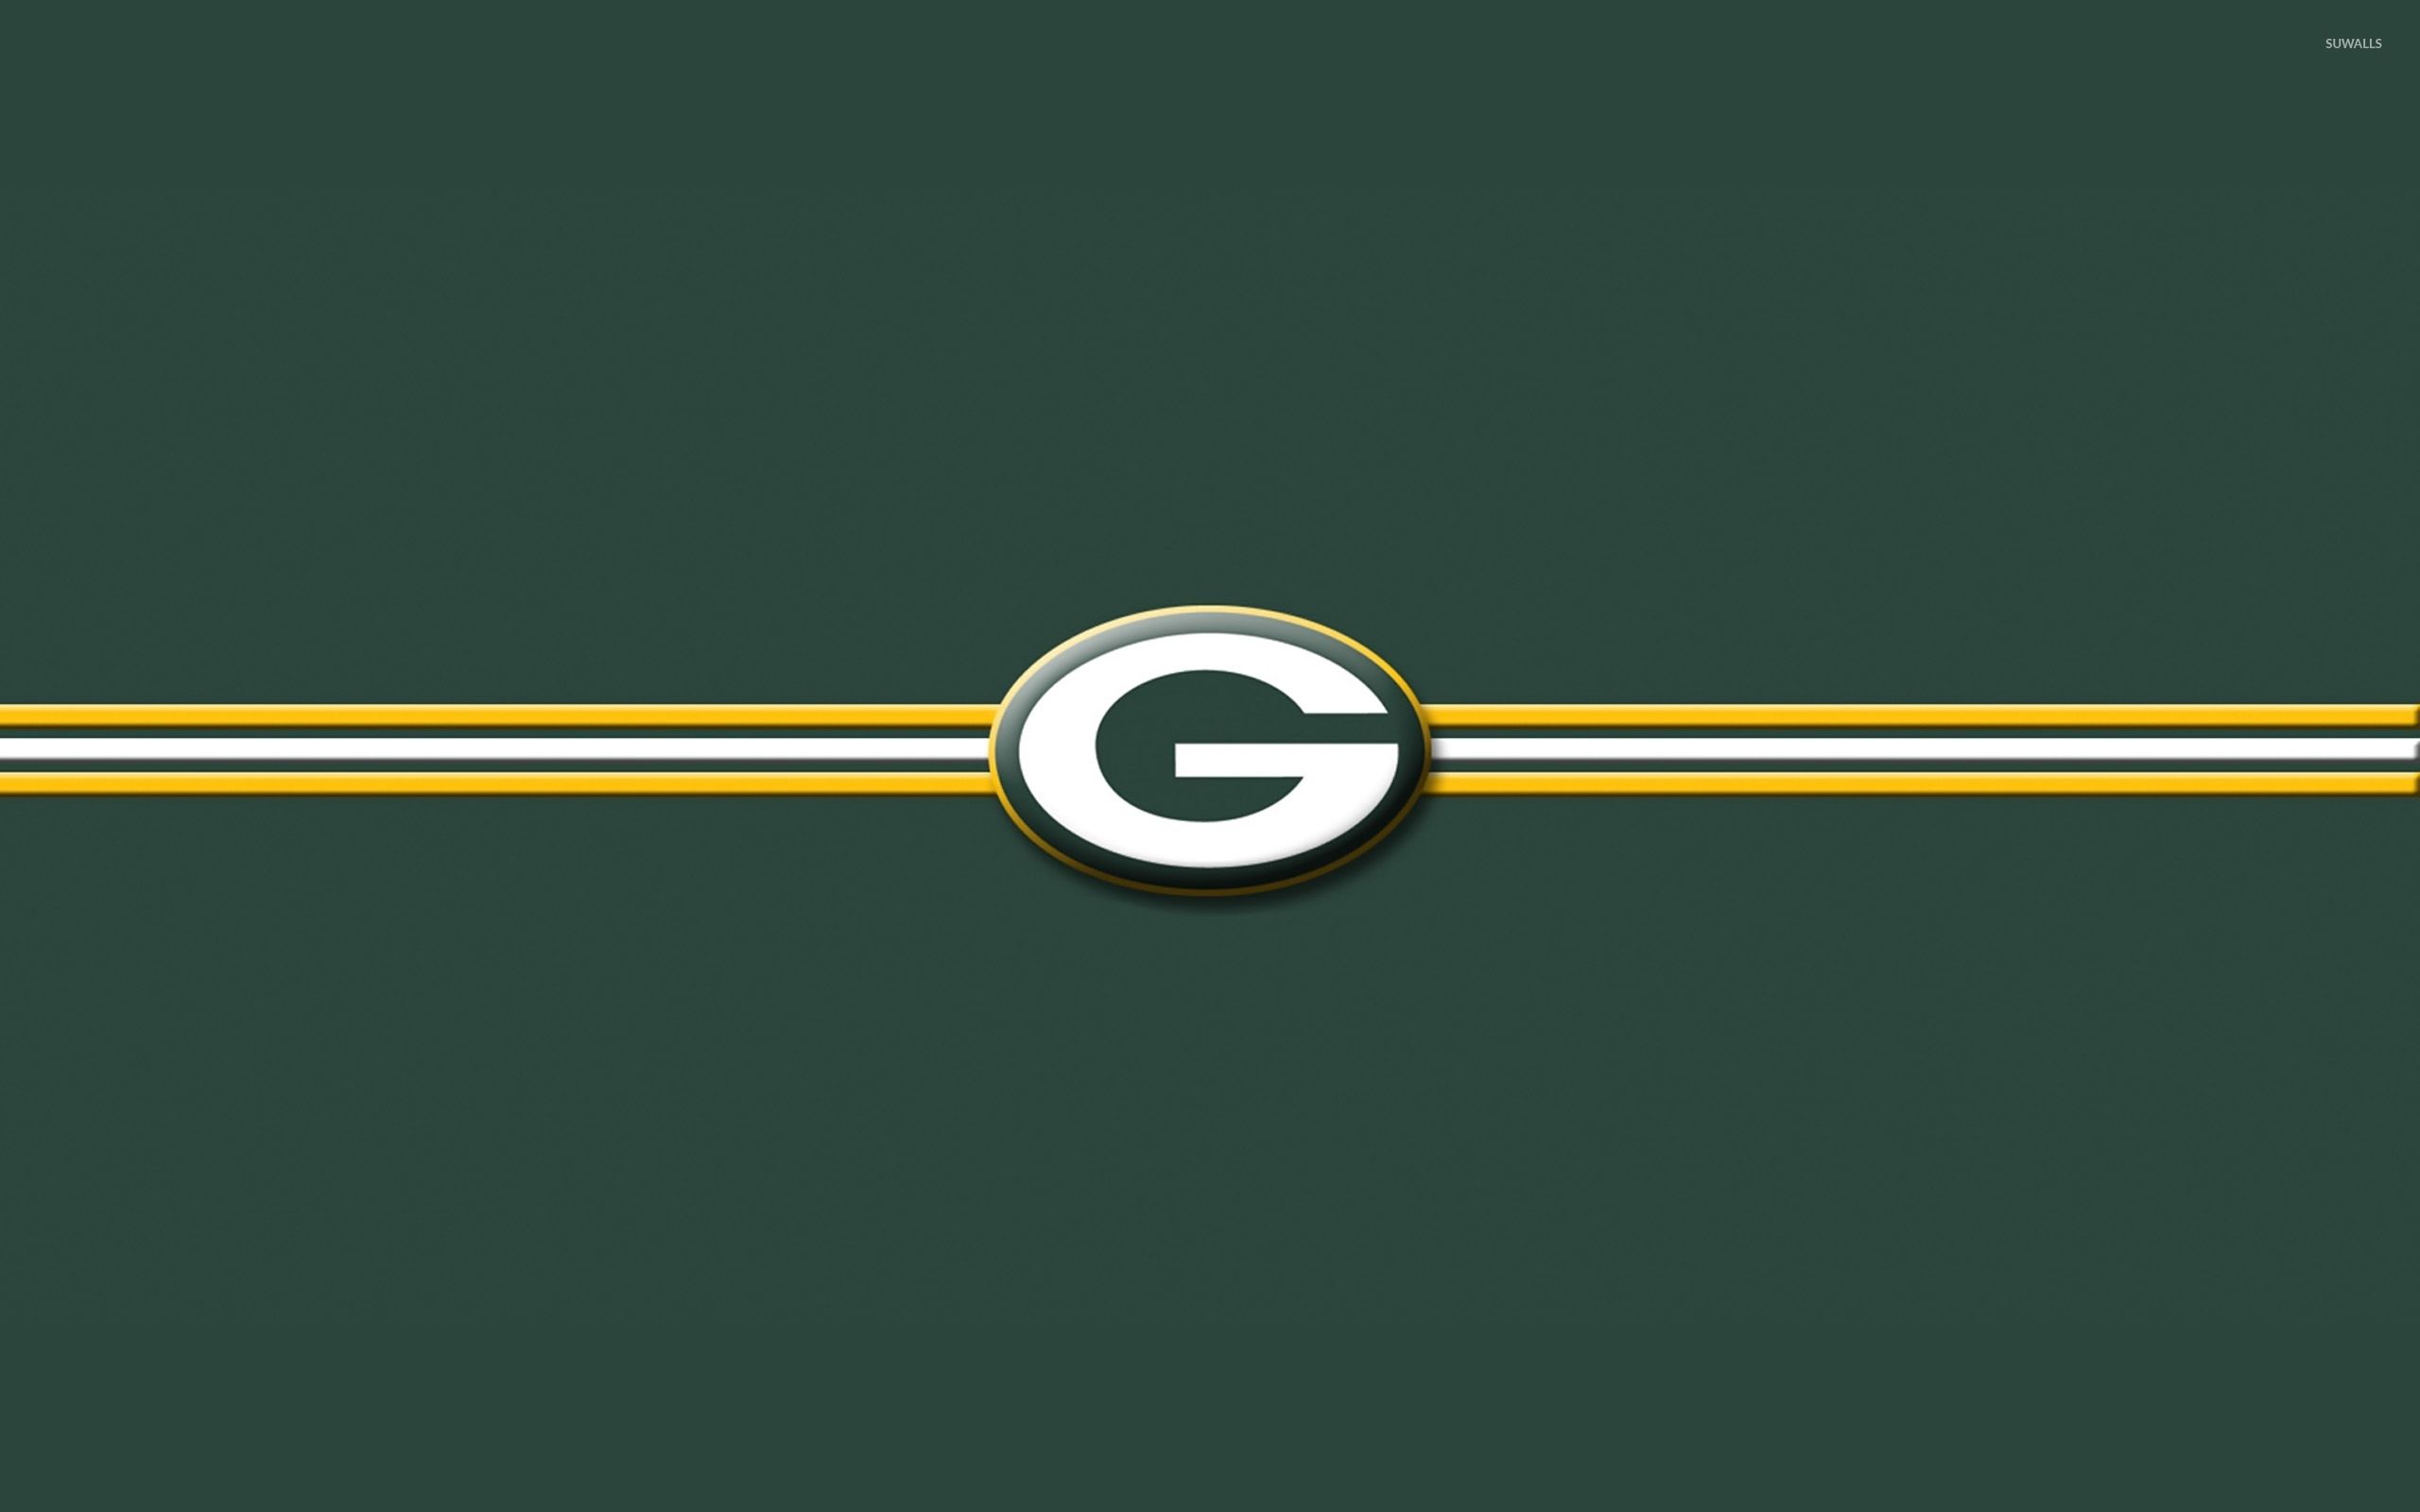 Green Bay Packers on green background wallpaper wallpaper